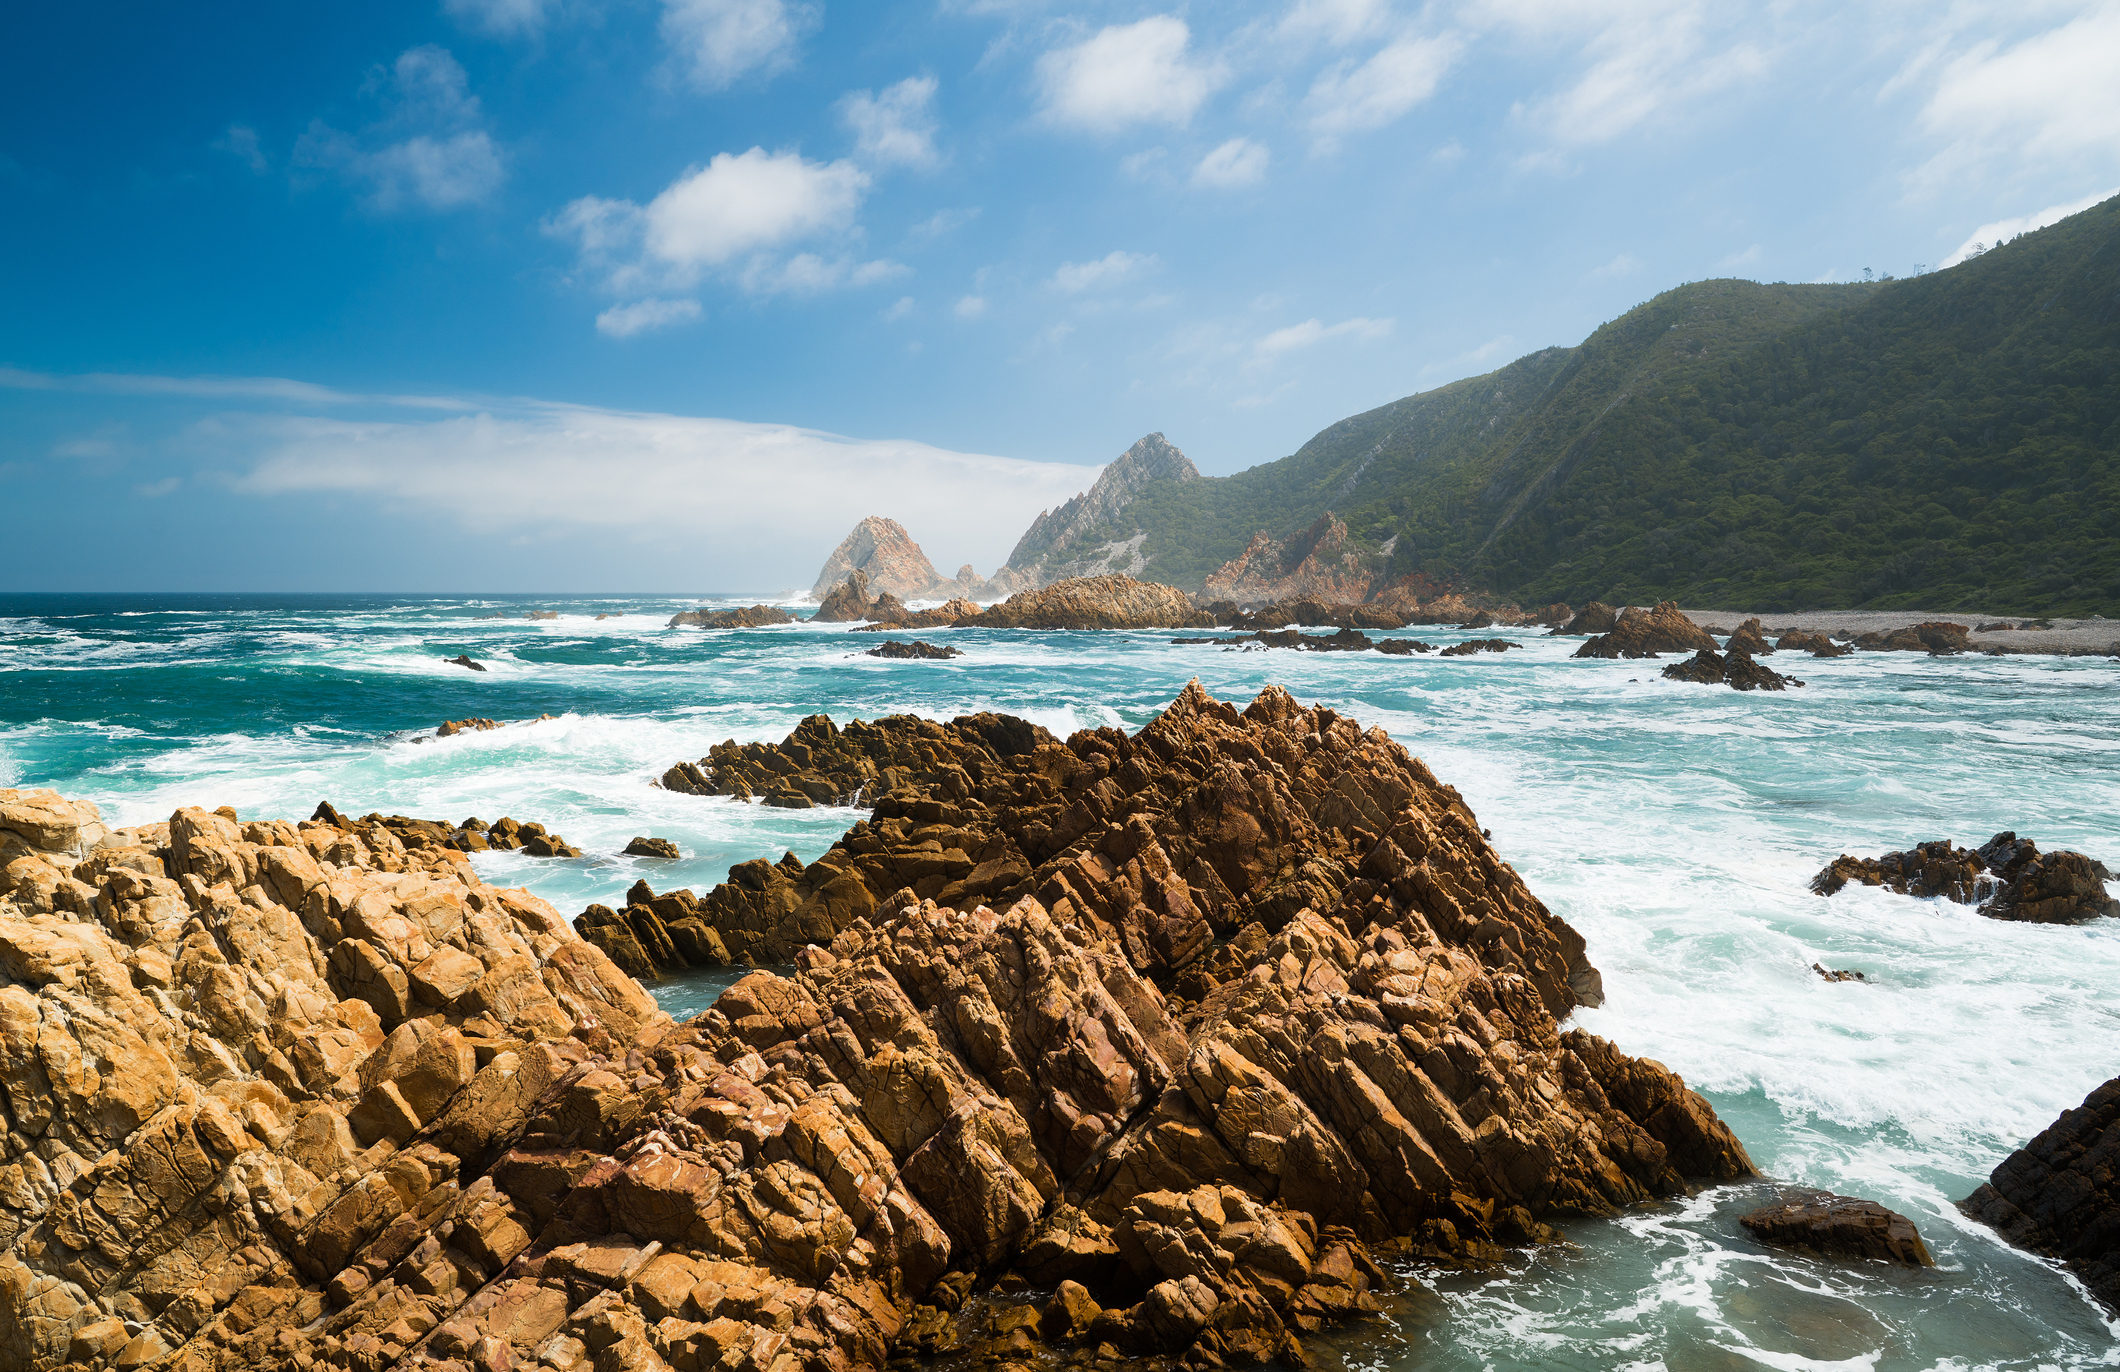 Experience dramatic landscape like this wild Knysna coastline, South Africa, when you take a tailor-made holiday with Alfred&.